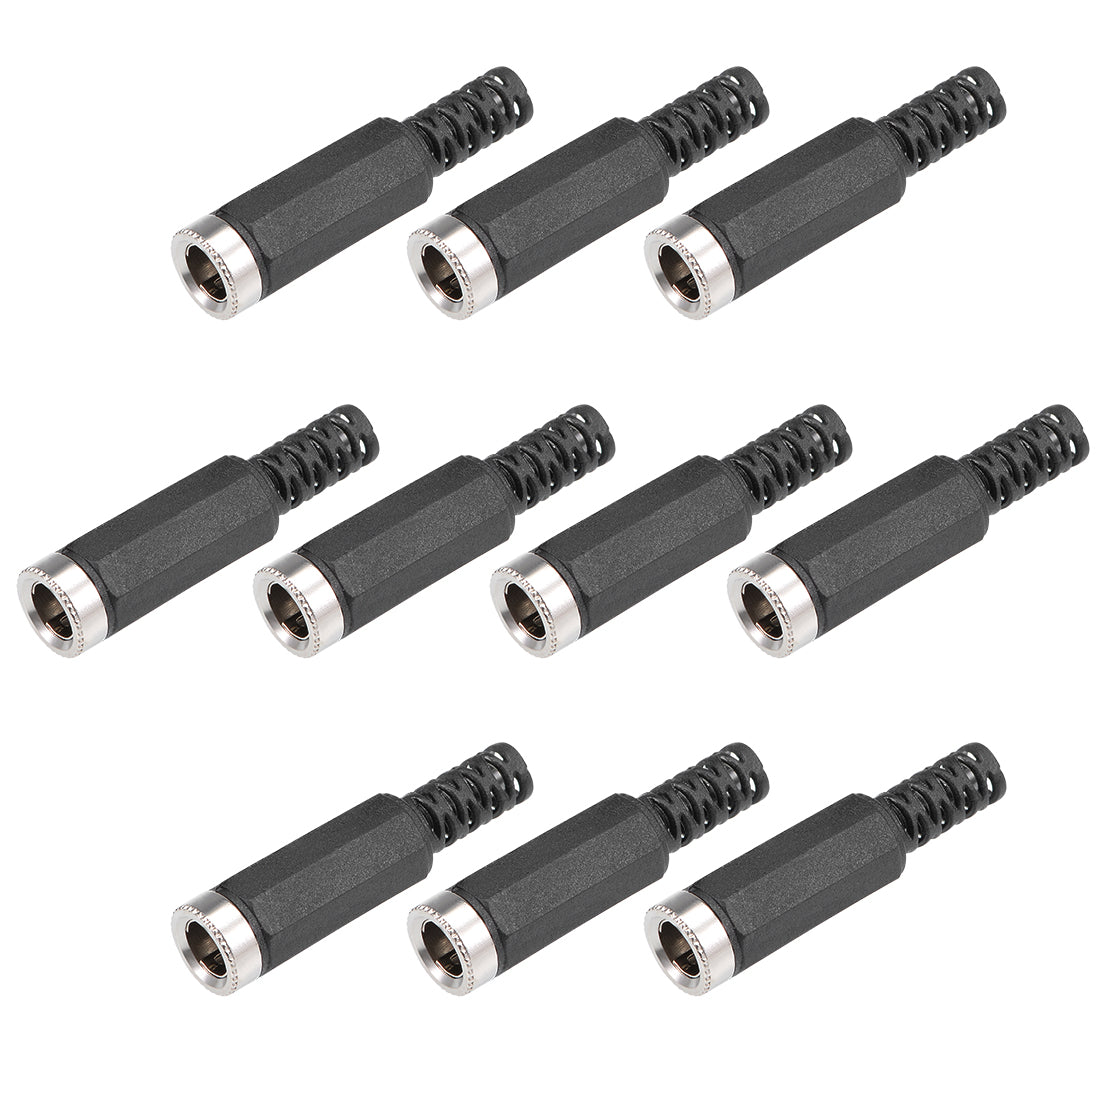 uxcell Uxcell 10pcs 5.5mm x 2.1mm Female DC Power Jack Connector Socket Adapter for Power Supply Connector